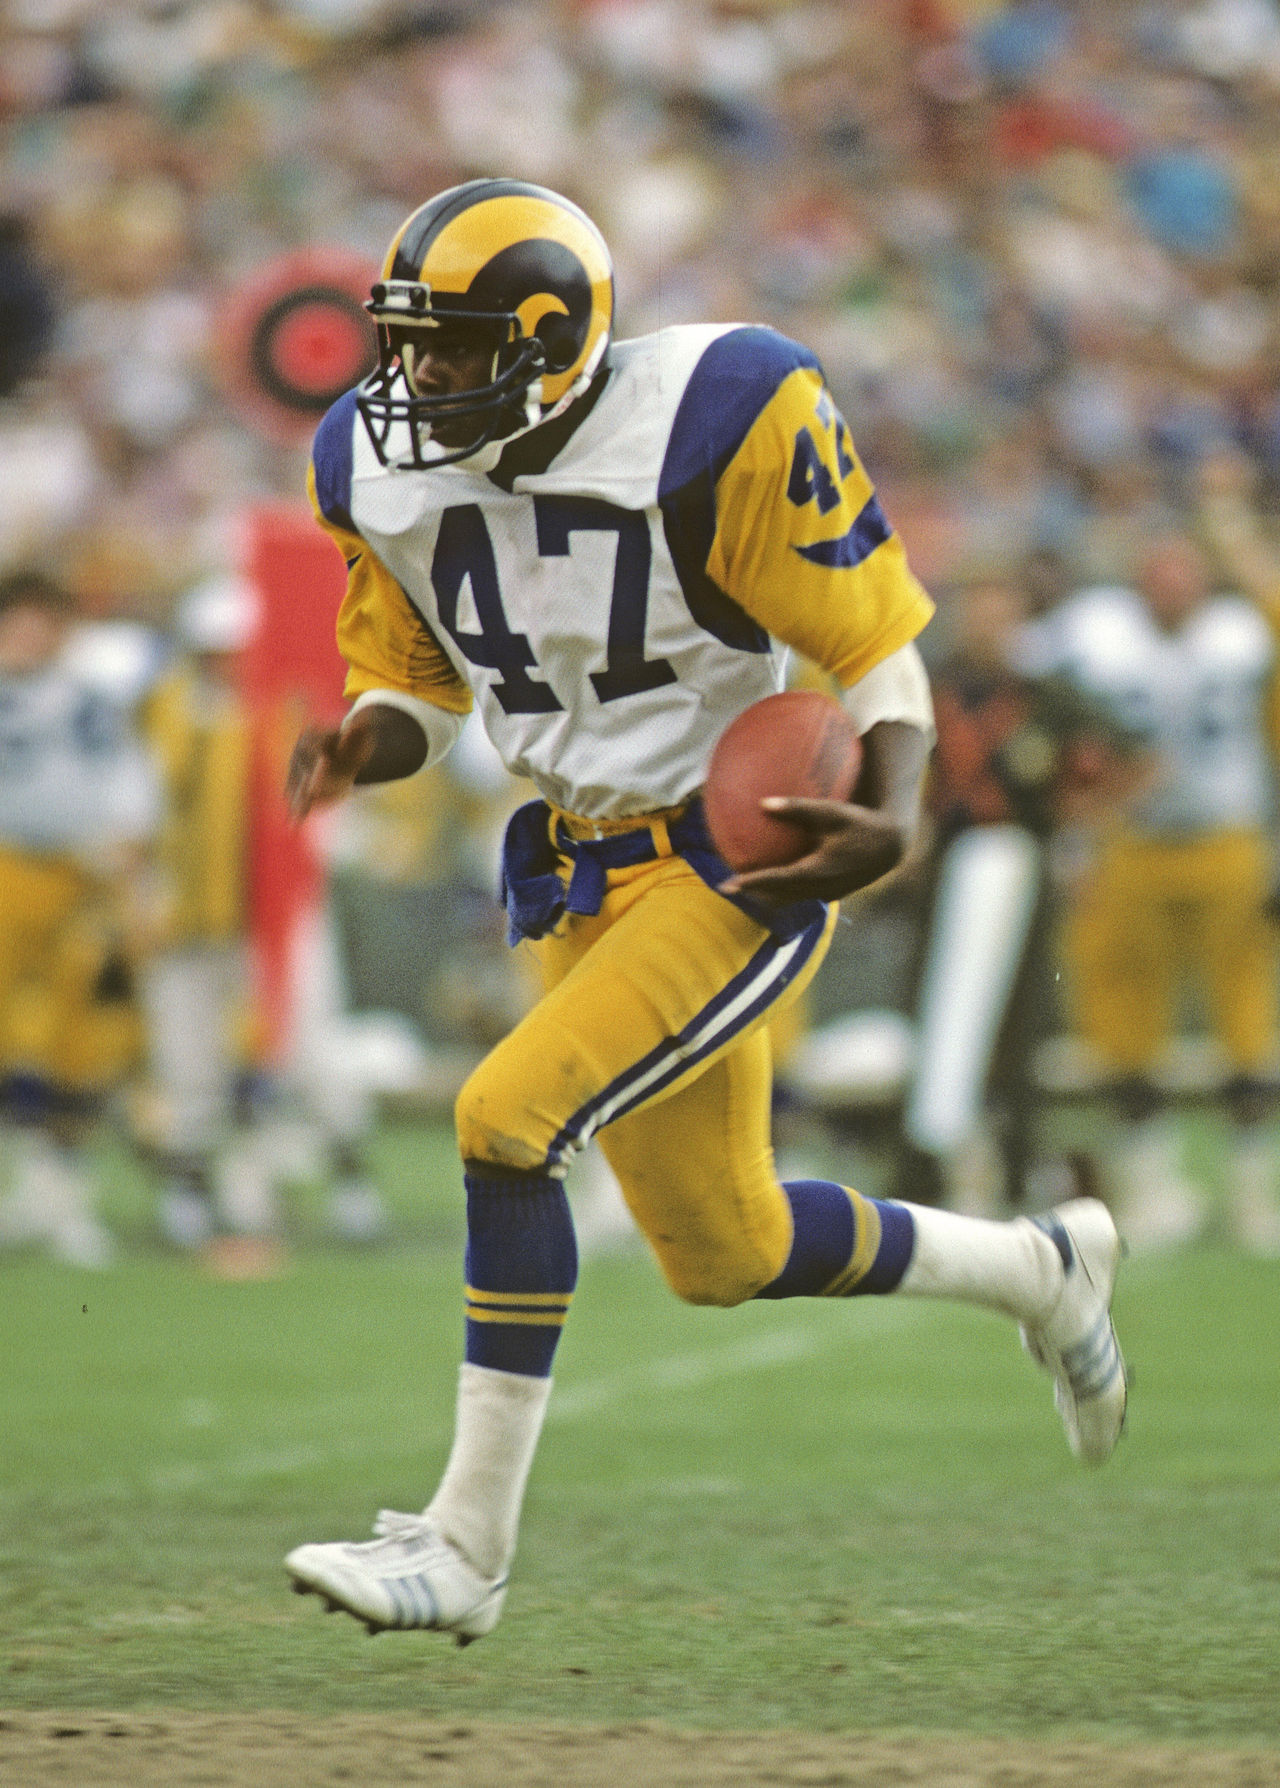 Former Los Angeles Rams Pro Bowl DB LeRoy Irvin joins us on this segment of Thursday Night Tailgate NFL podcast